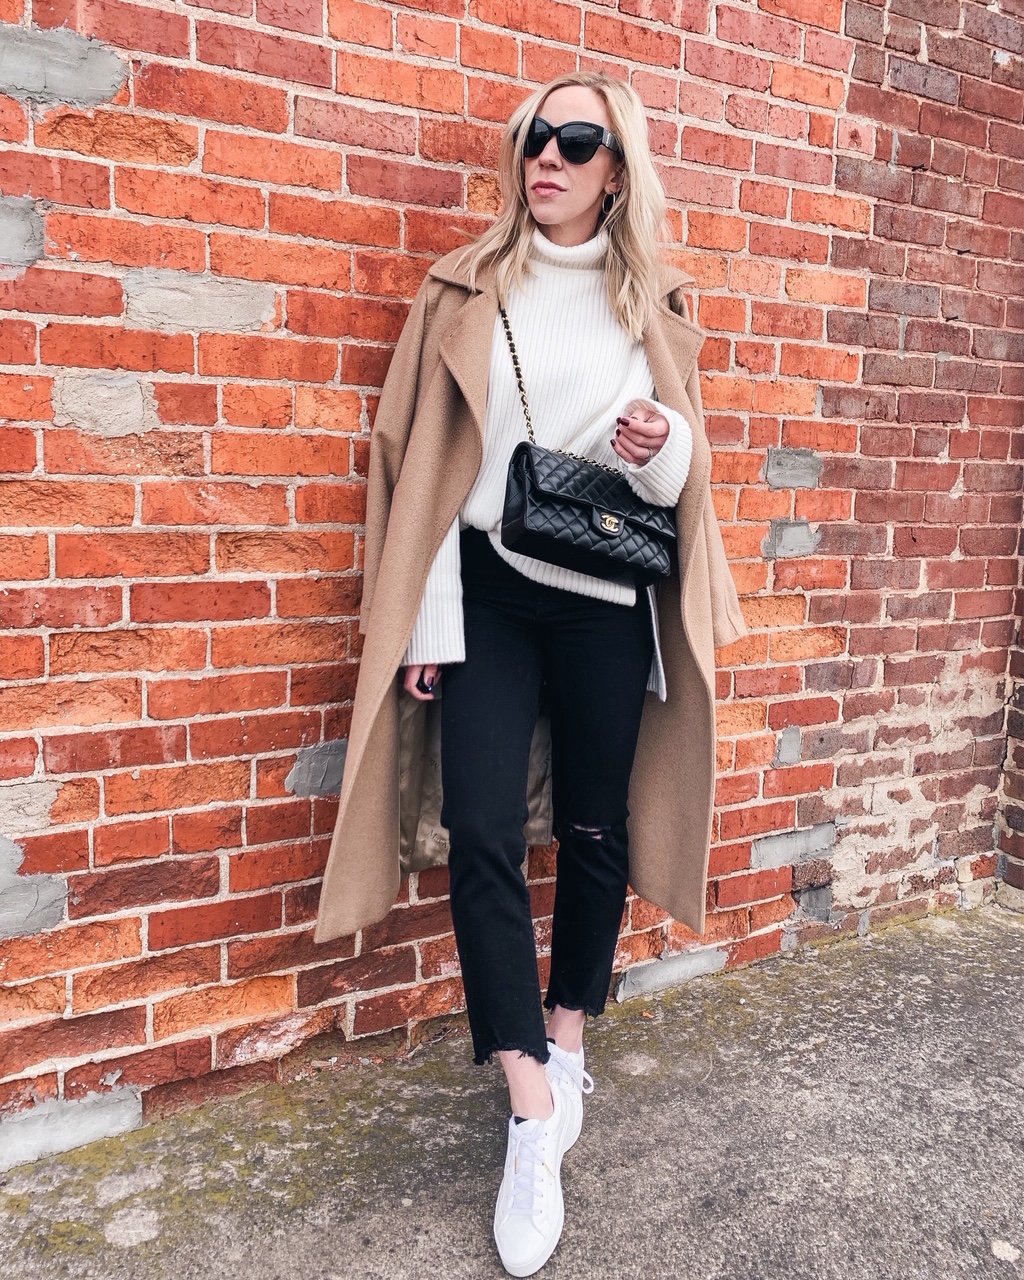 Patch Dissipate escort Meagan Brandon fashion blogger of Meagan's Moda wears camel coat with beige  turtleneck, black jeans and white Adidas sleek sneakers - Meagan's Moda